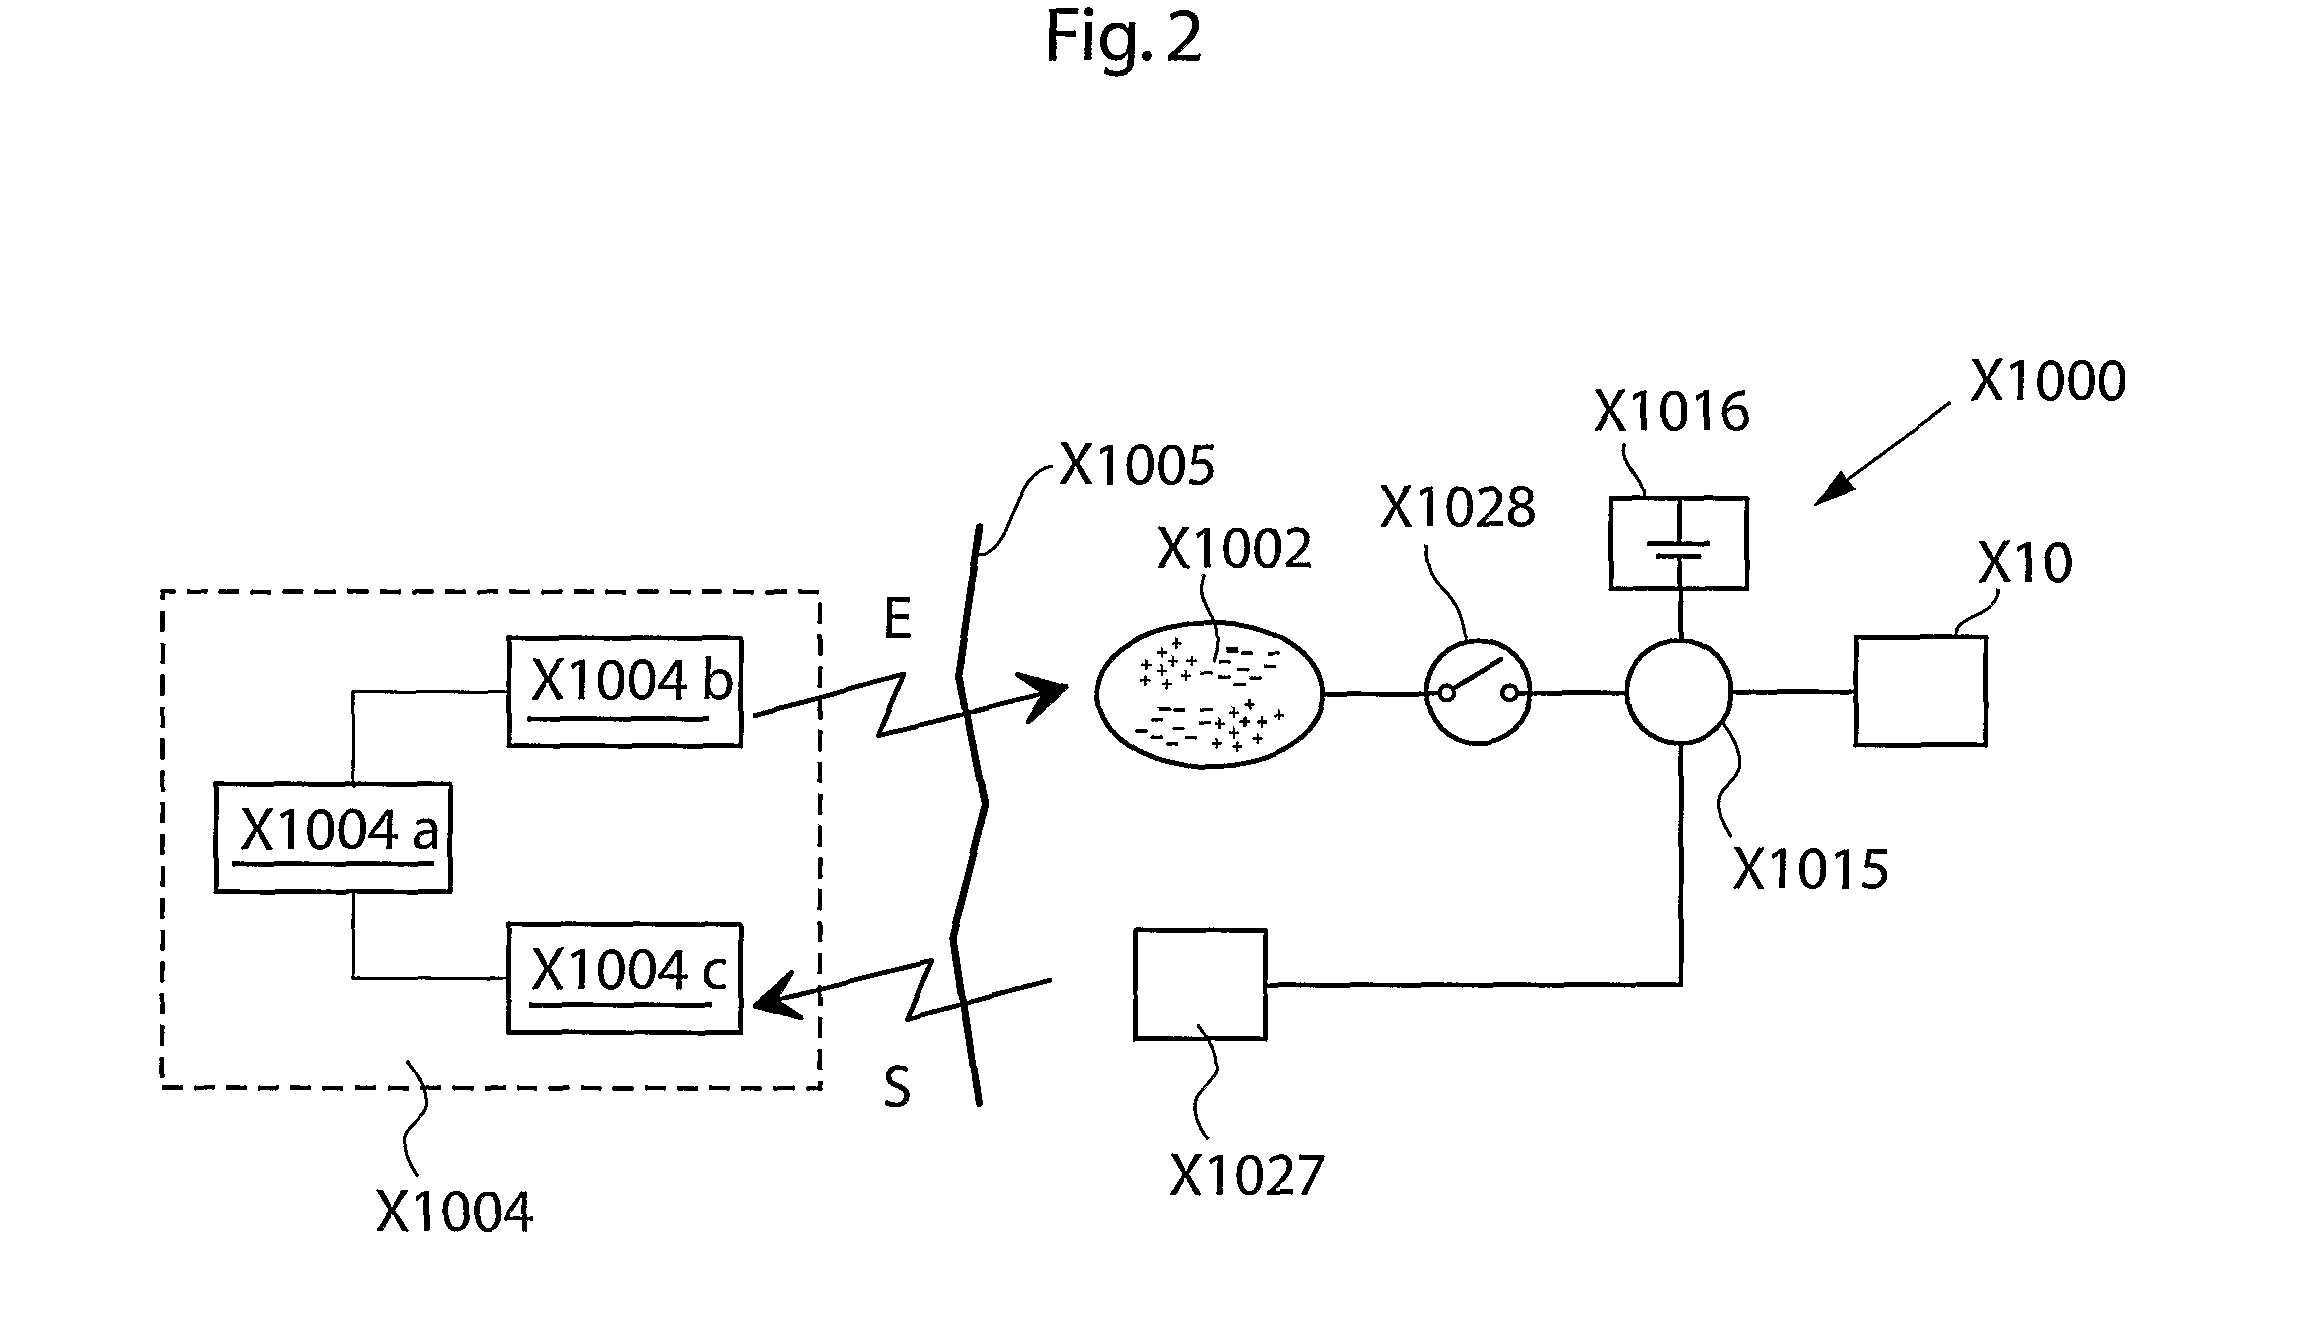 Method and apparatus for supplying energy to an implant